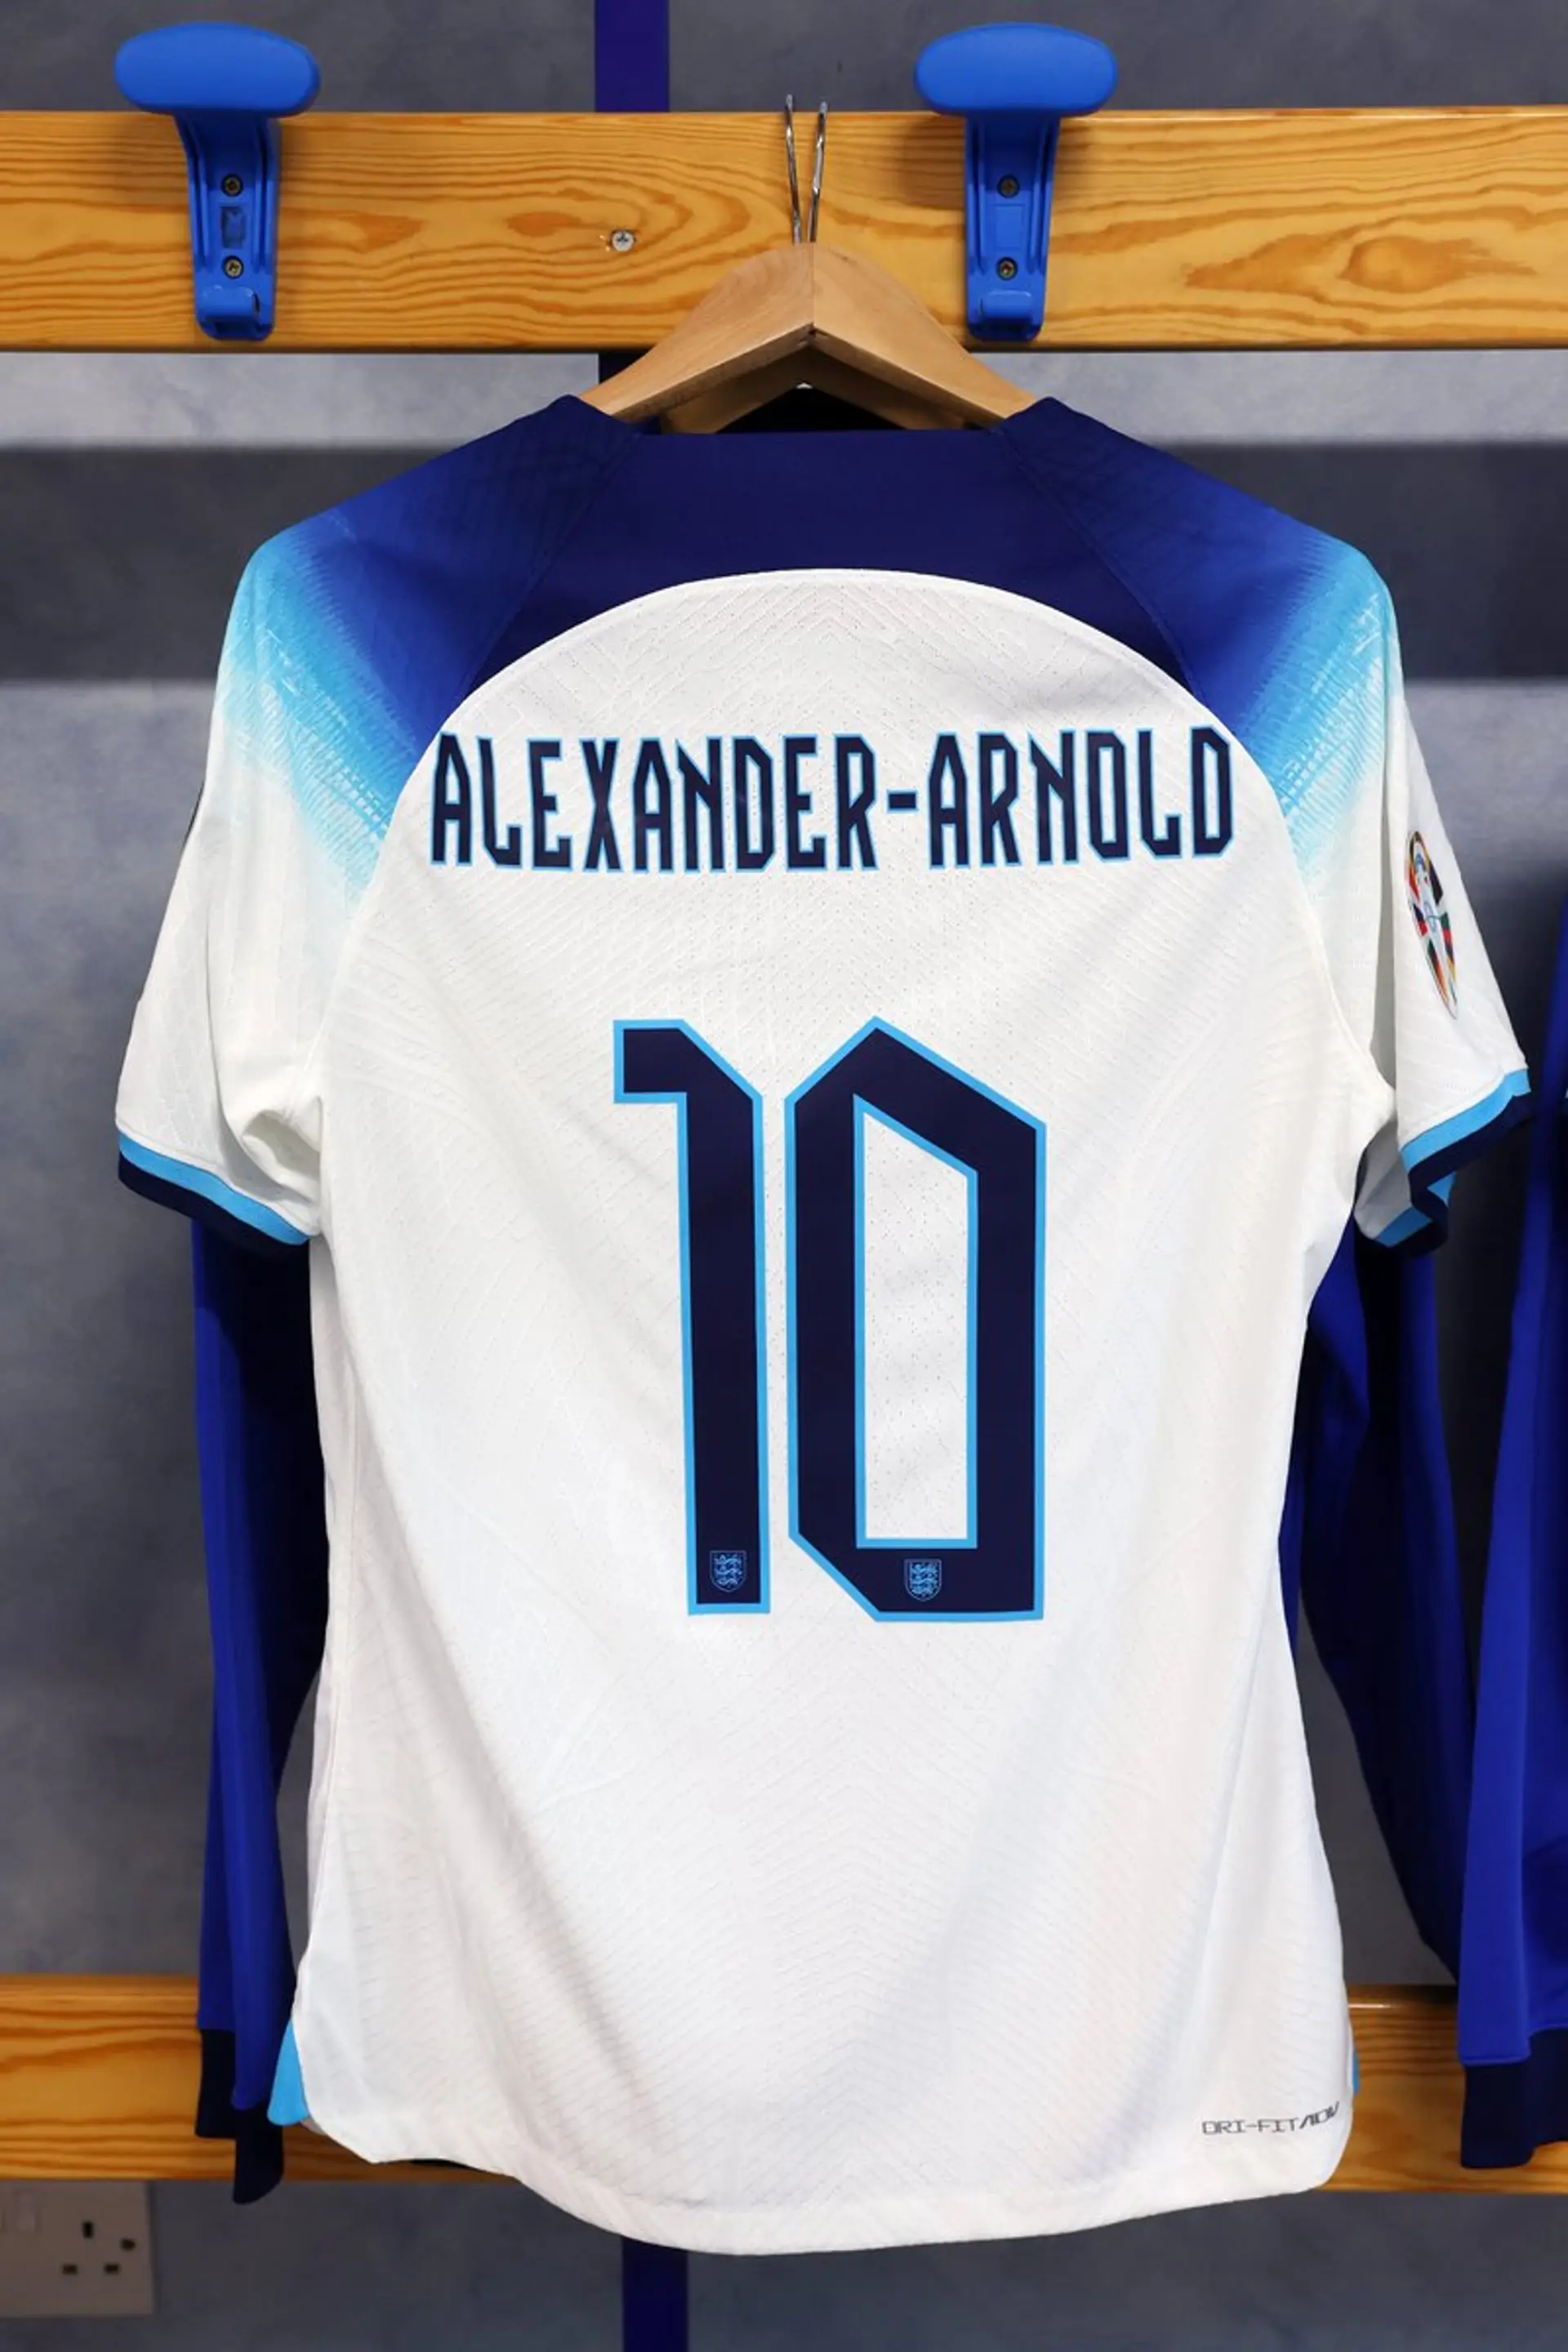 Trent Alexander-Arnold given No.10 shirt as he's set for midfield 